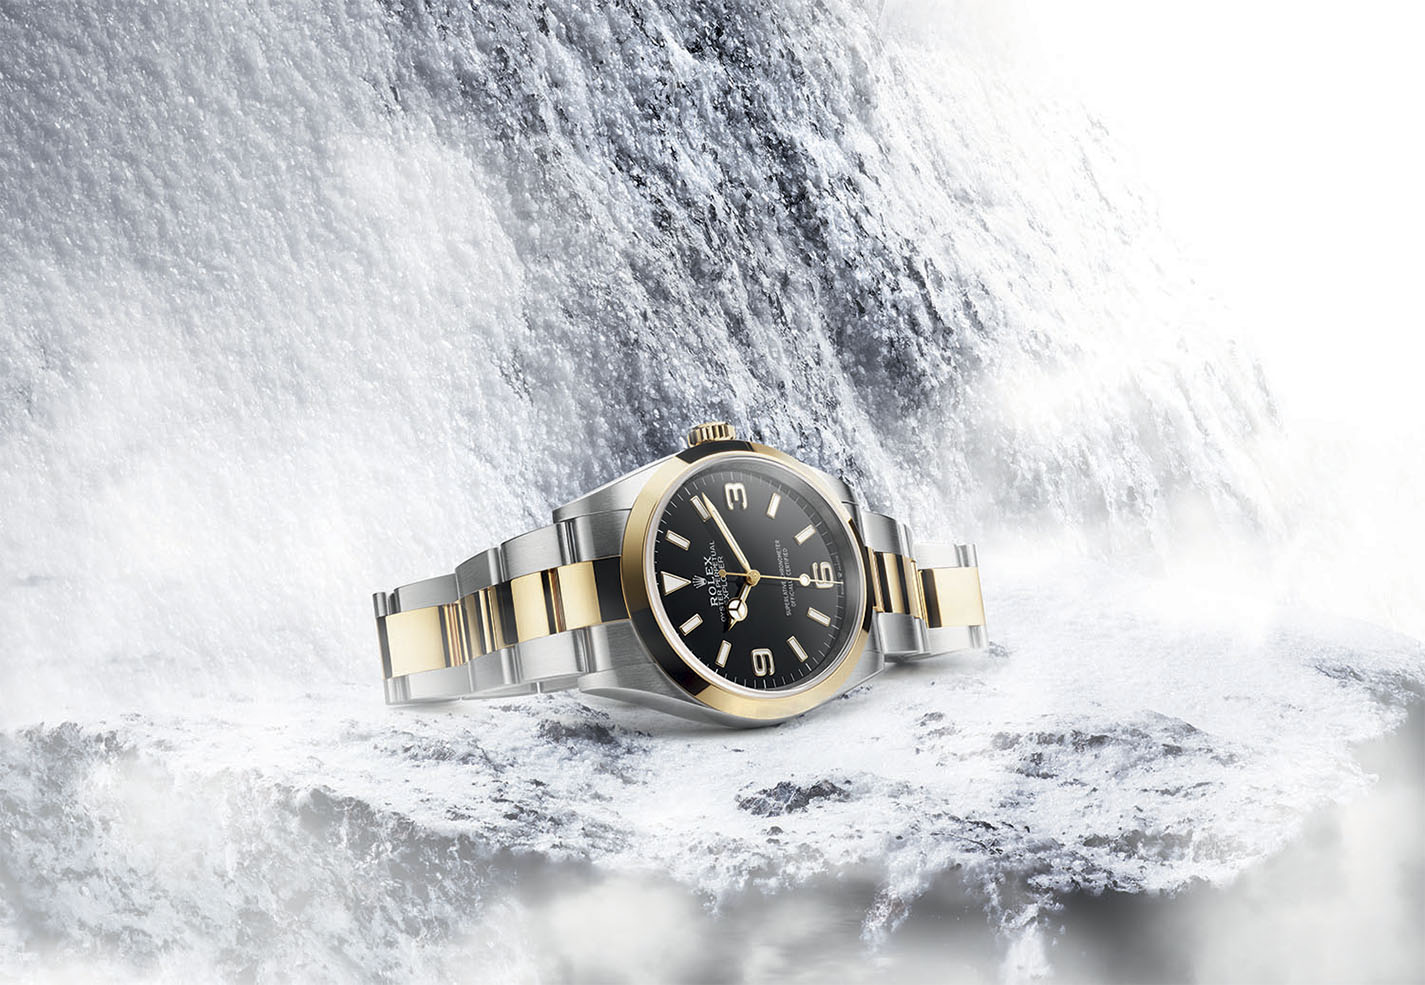 Two-tone Rolex watch with black dial on snowy background